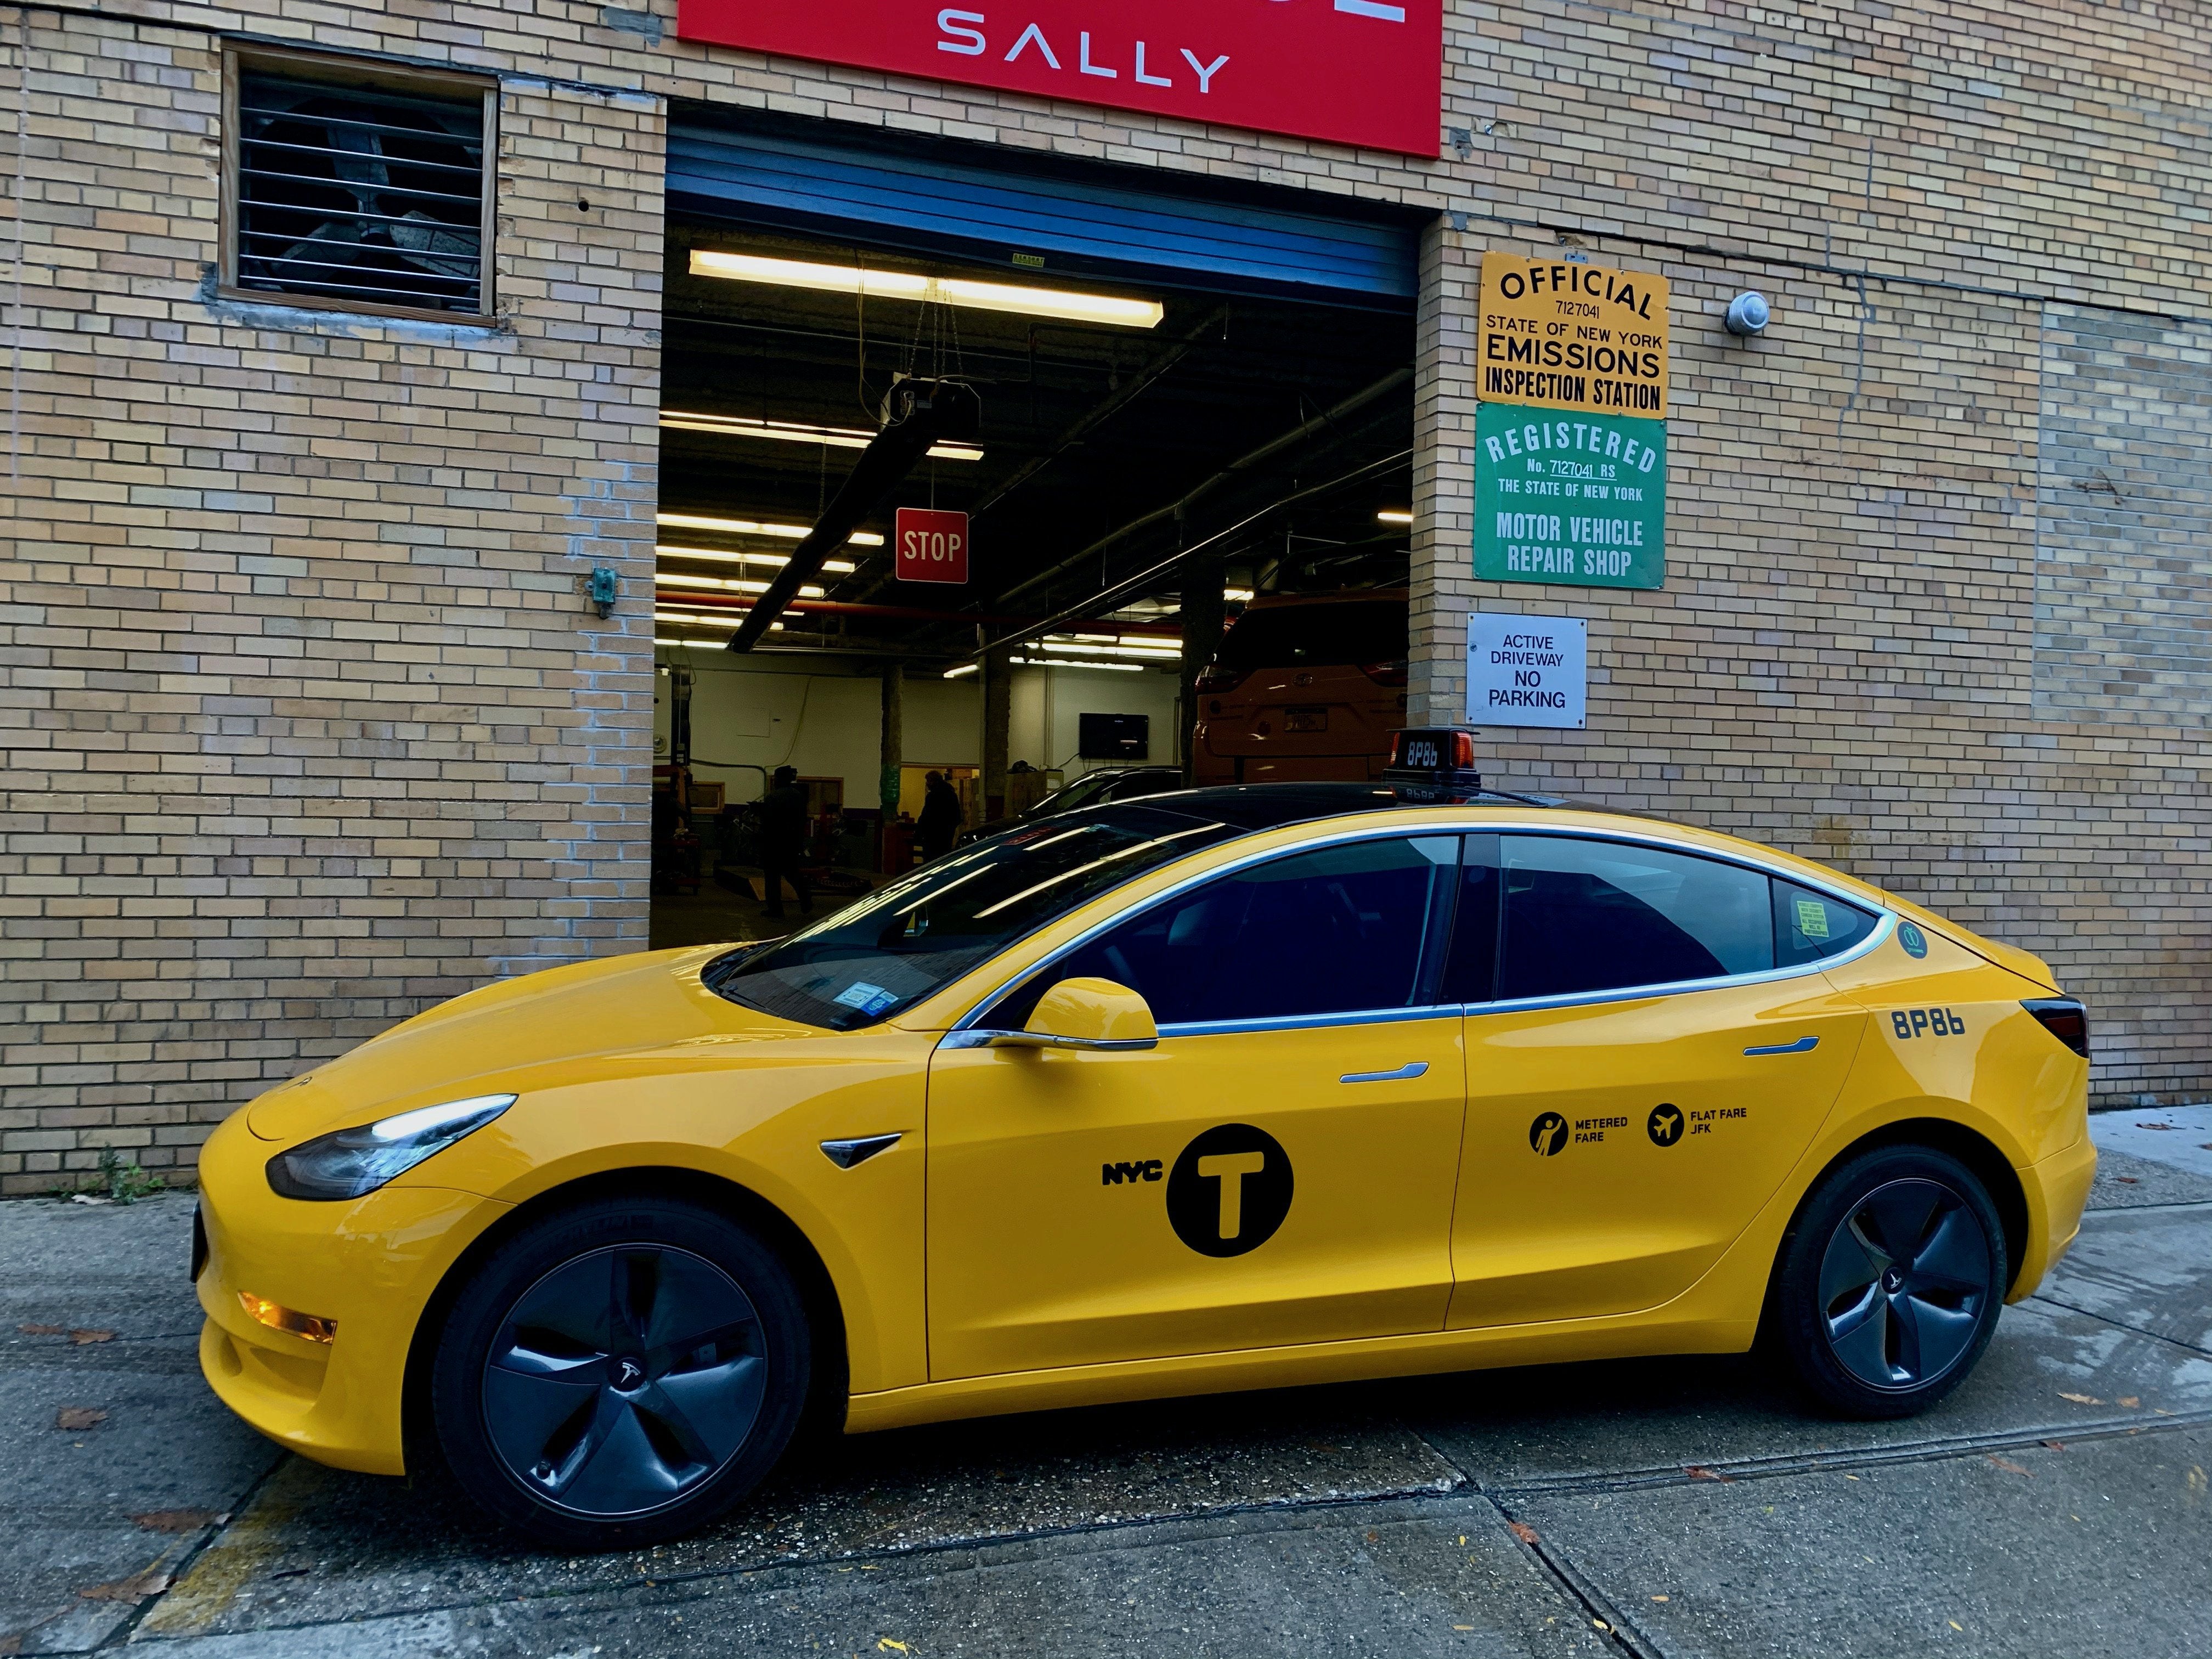 Tesla Model 3 Taxi Debuts in NYC, Taking First Step Towards Cleaner Air in Our Cities